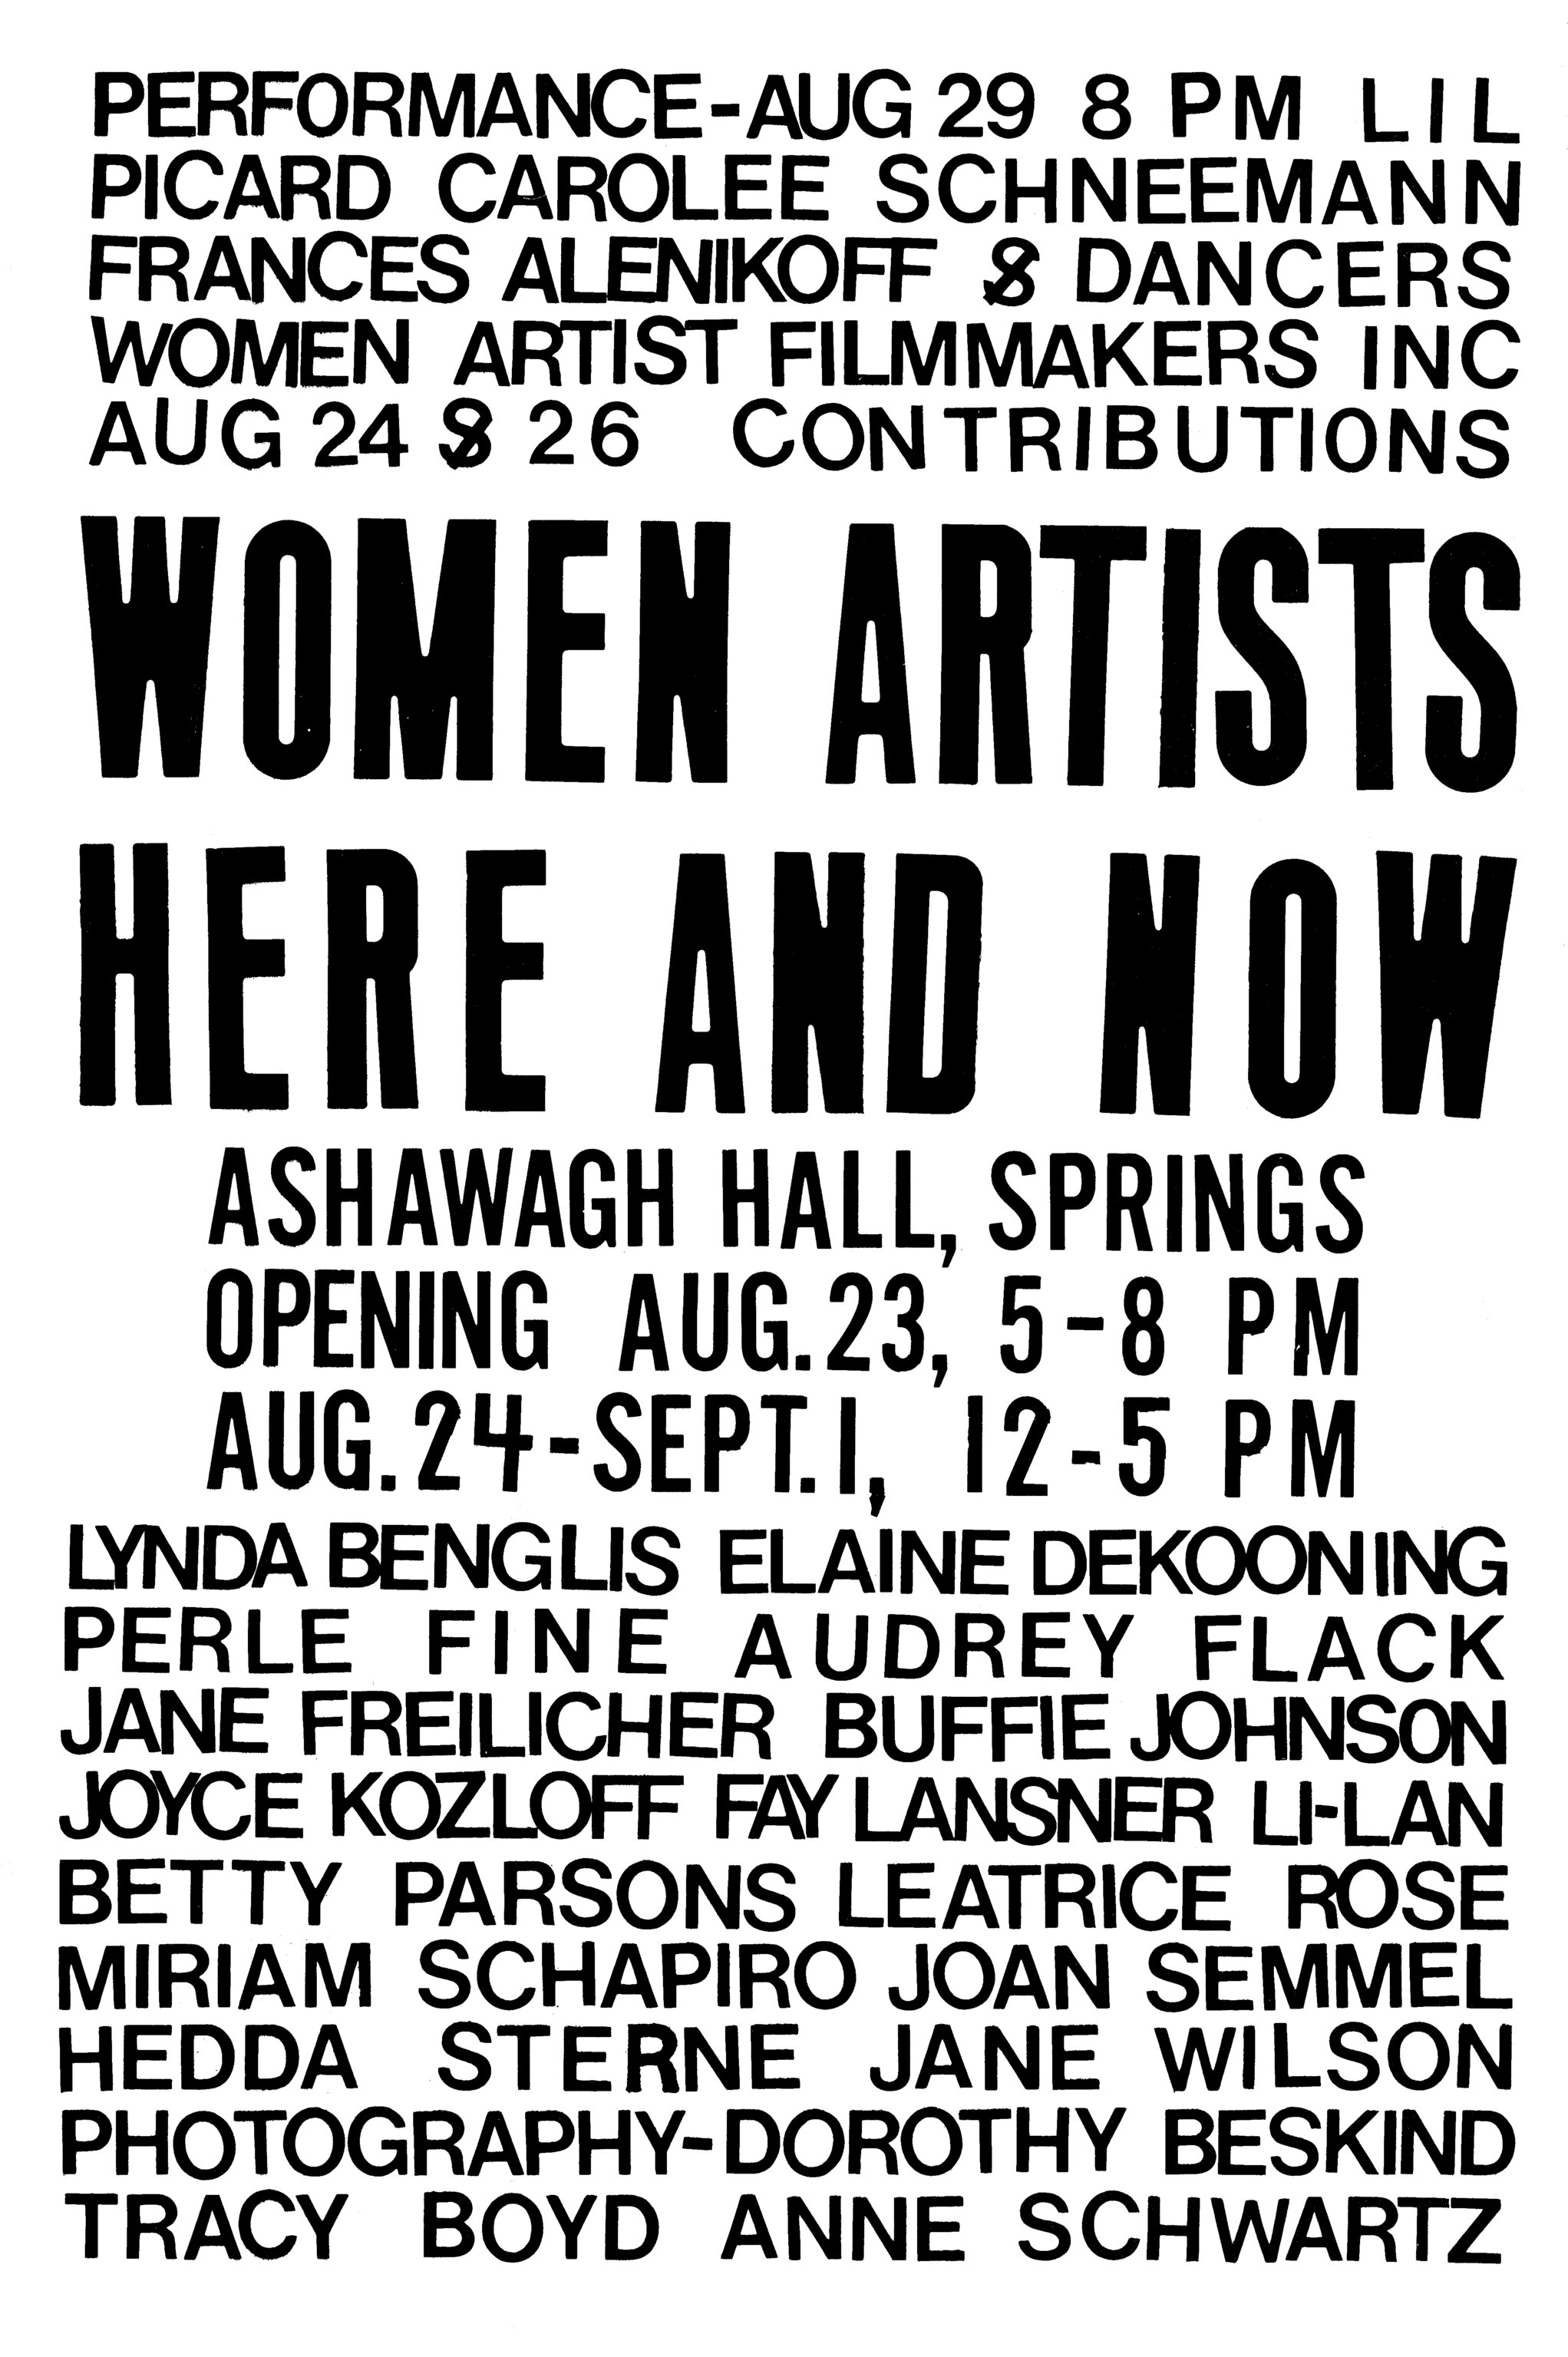 Joyce Kozloff and Joan Semmel with Soft Network, Women Artists Here and Now, 1975/2021